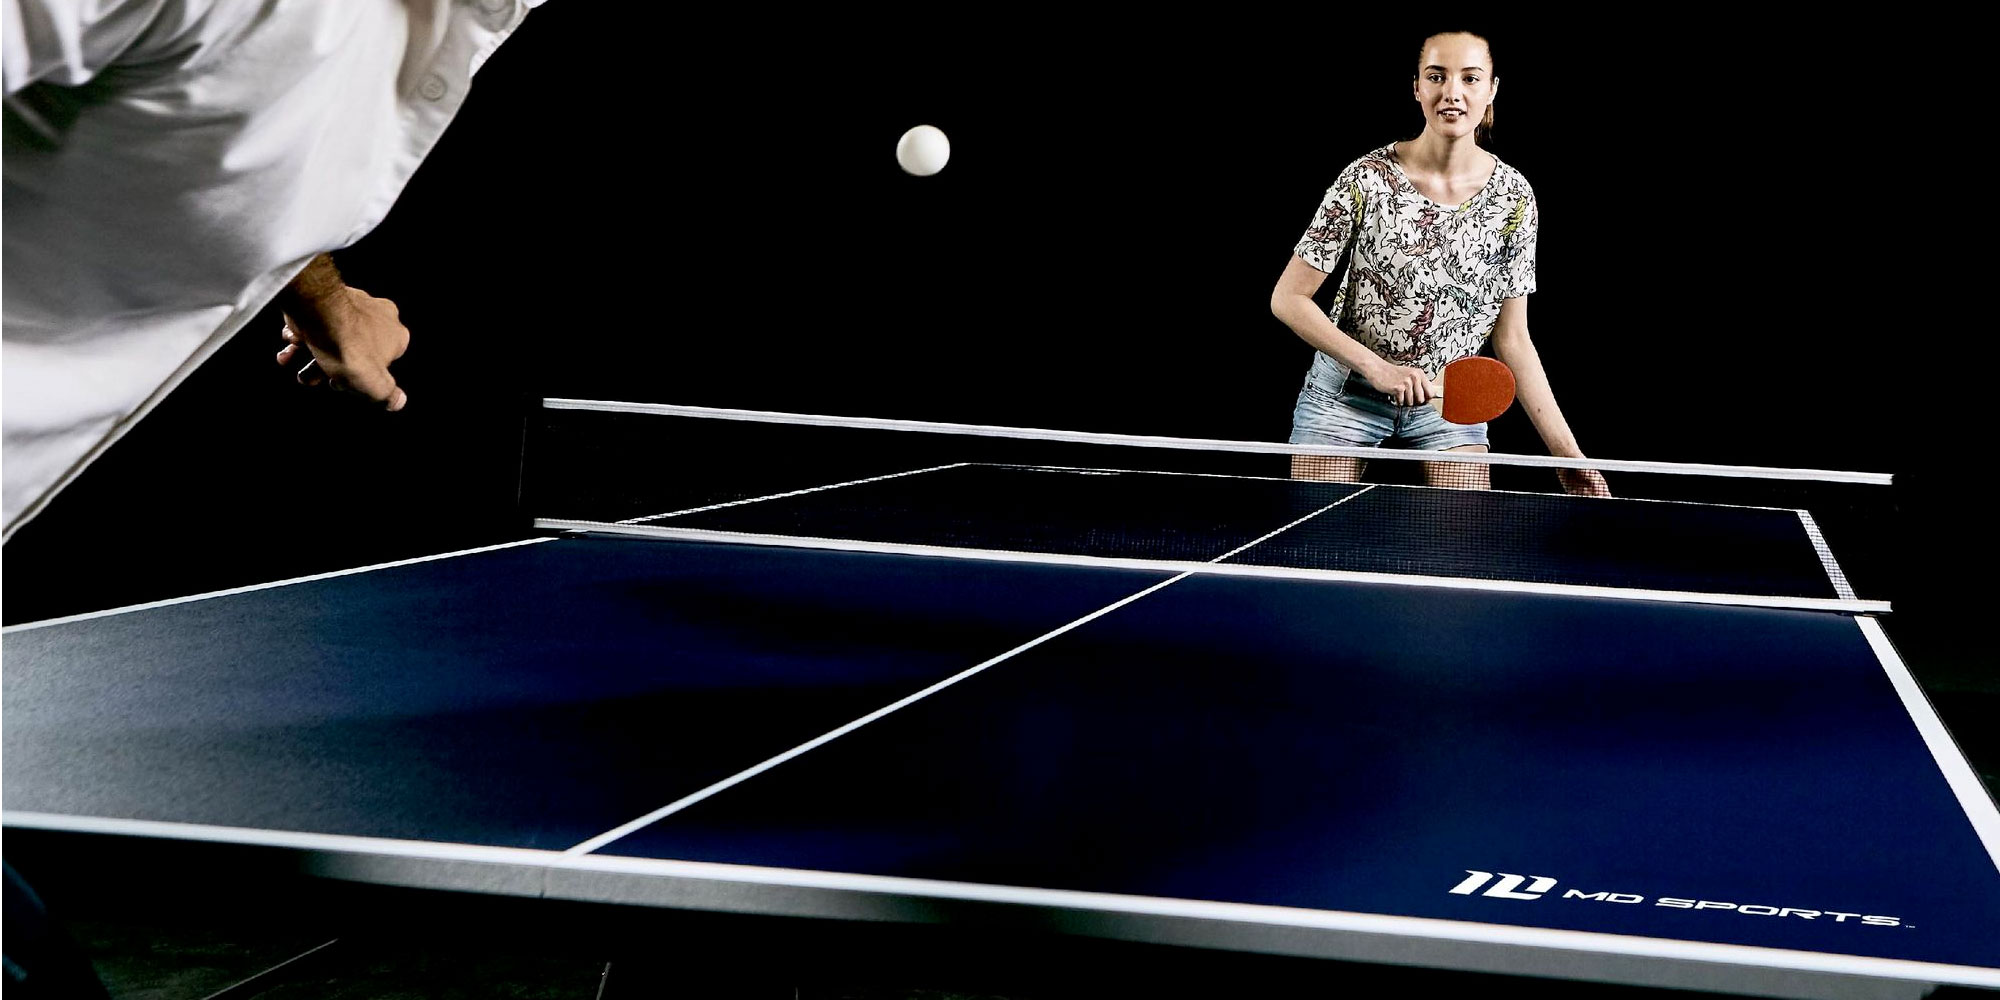 ping pong tables under 200 dollars